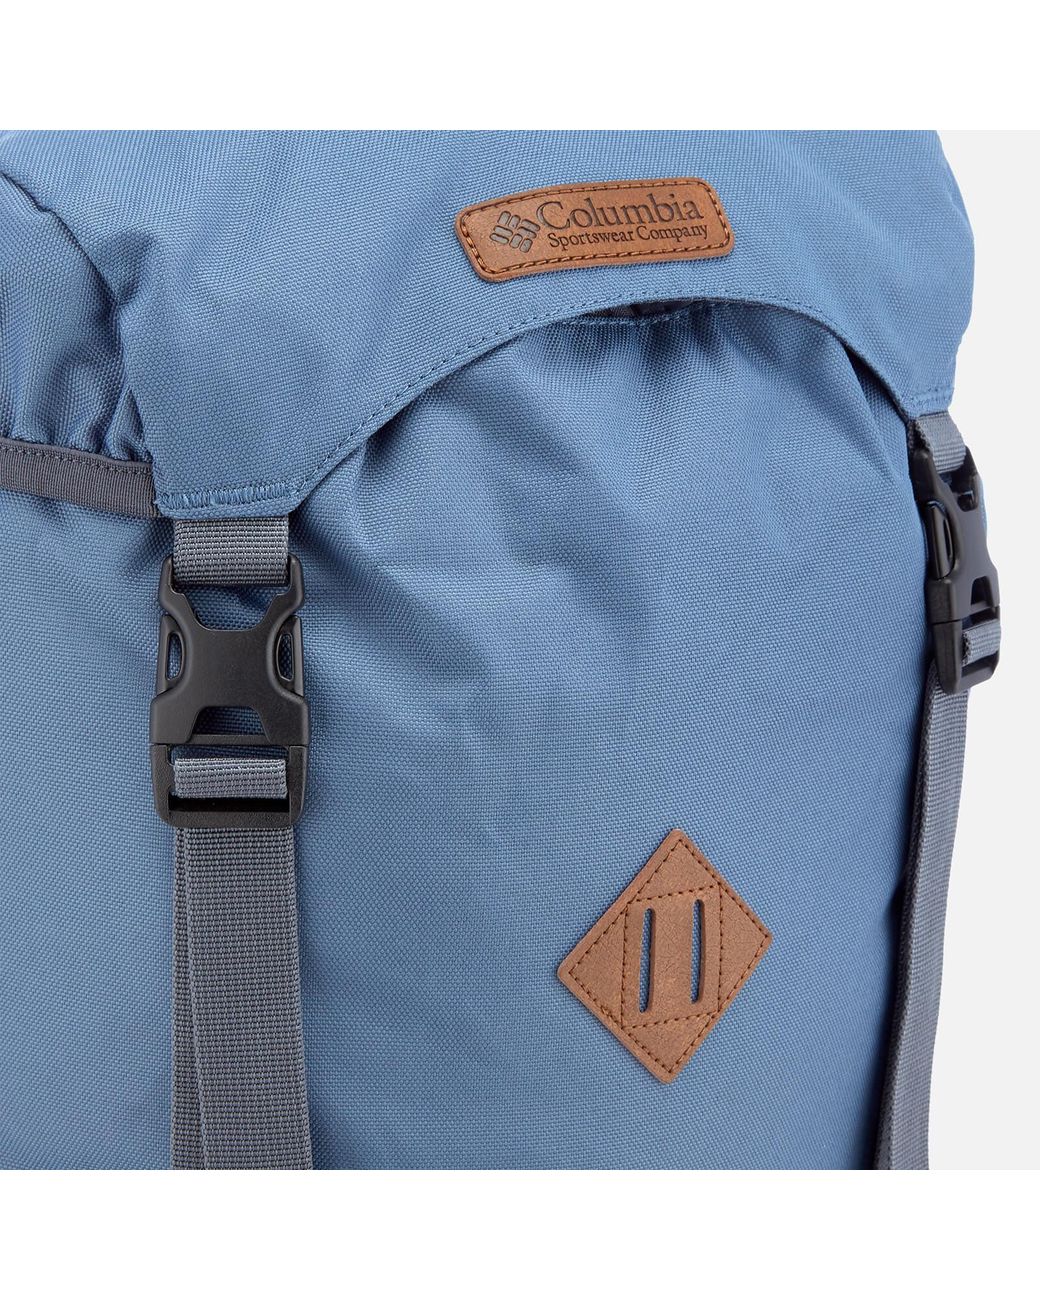 Columbia Classic Outdoor 25l Backpack in Blue for Men | Lyst